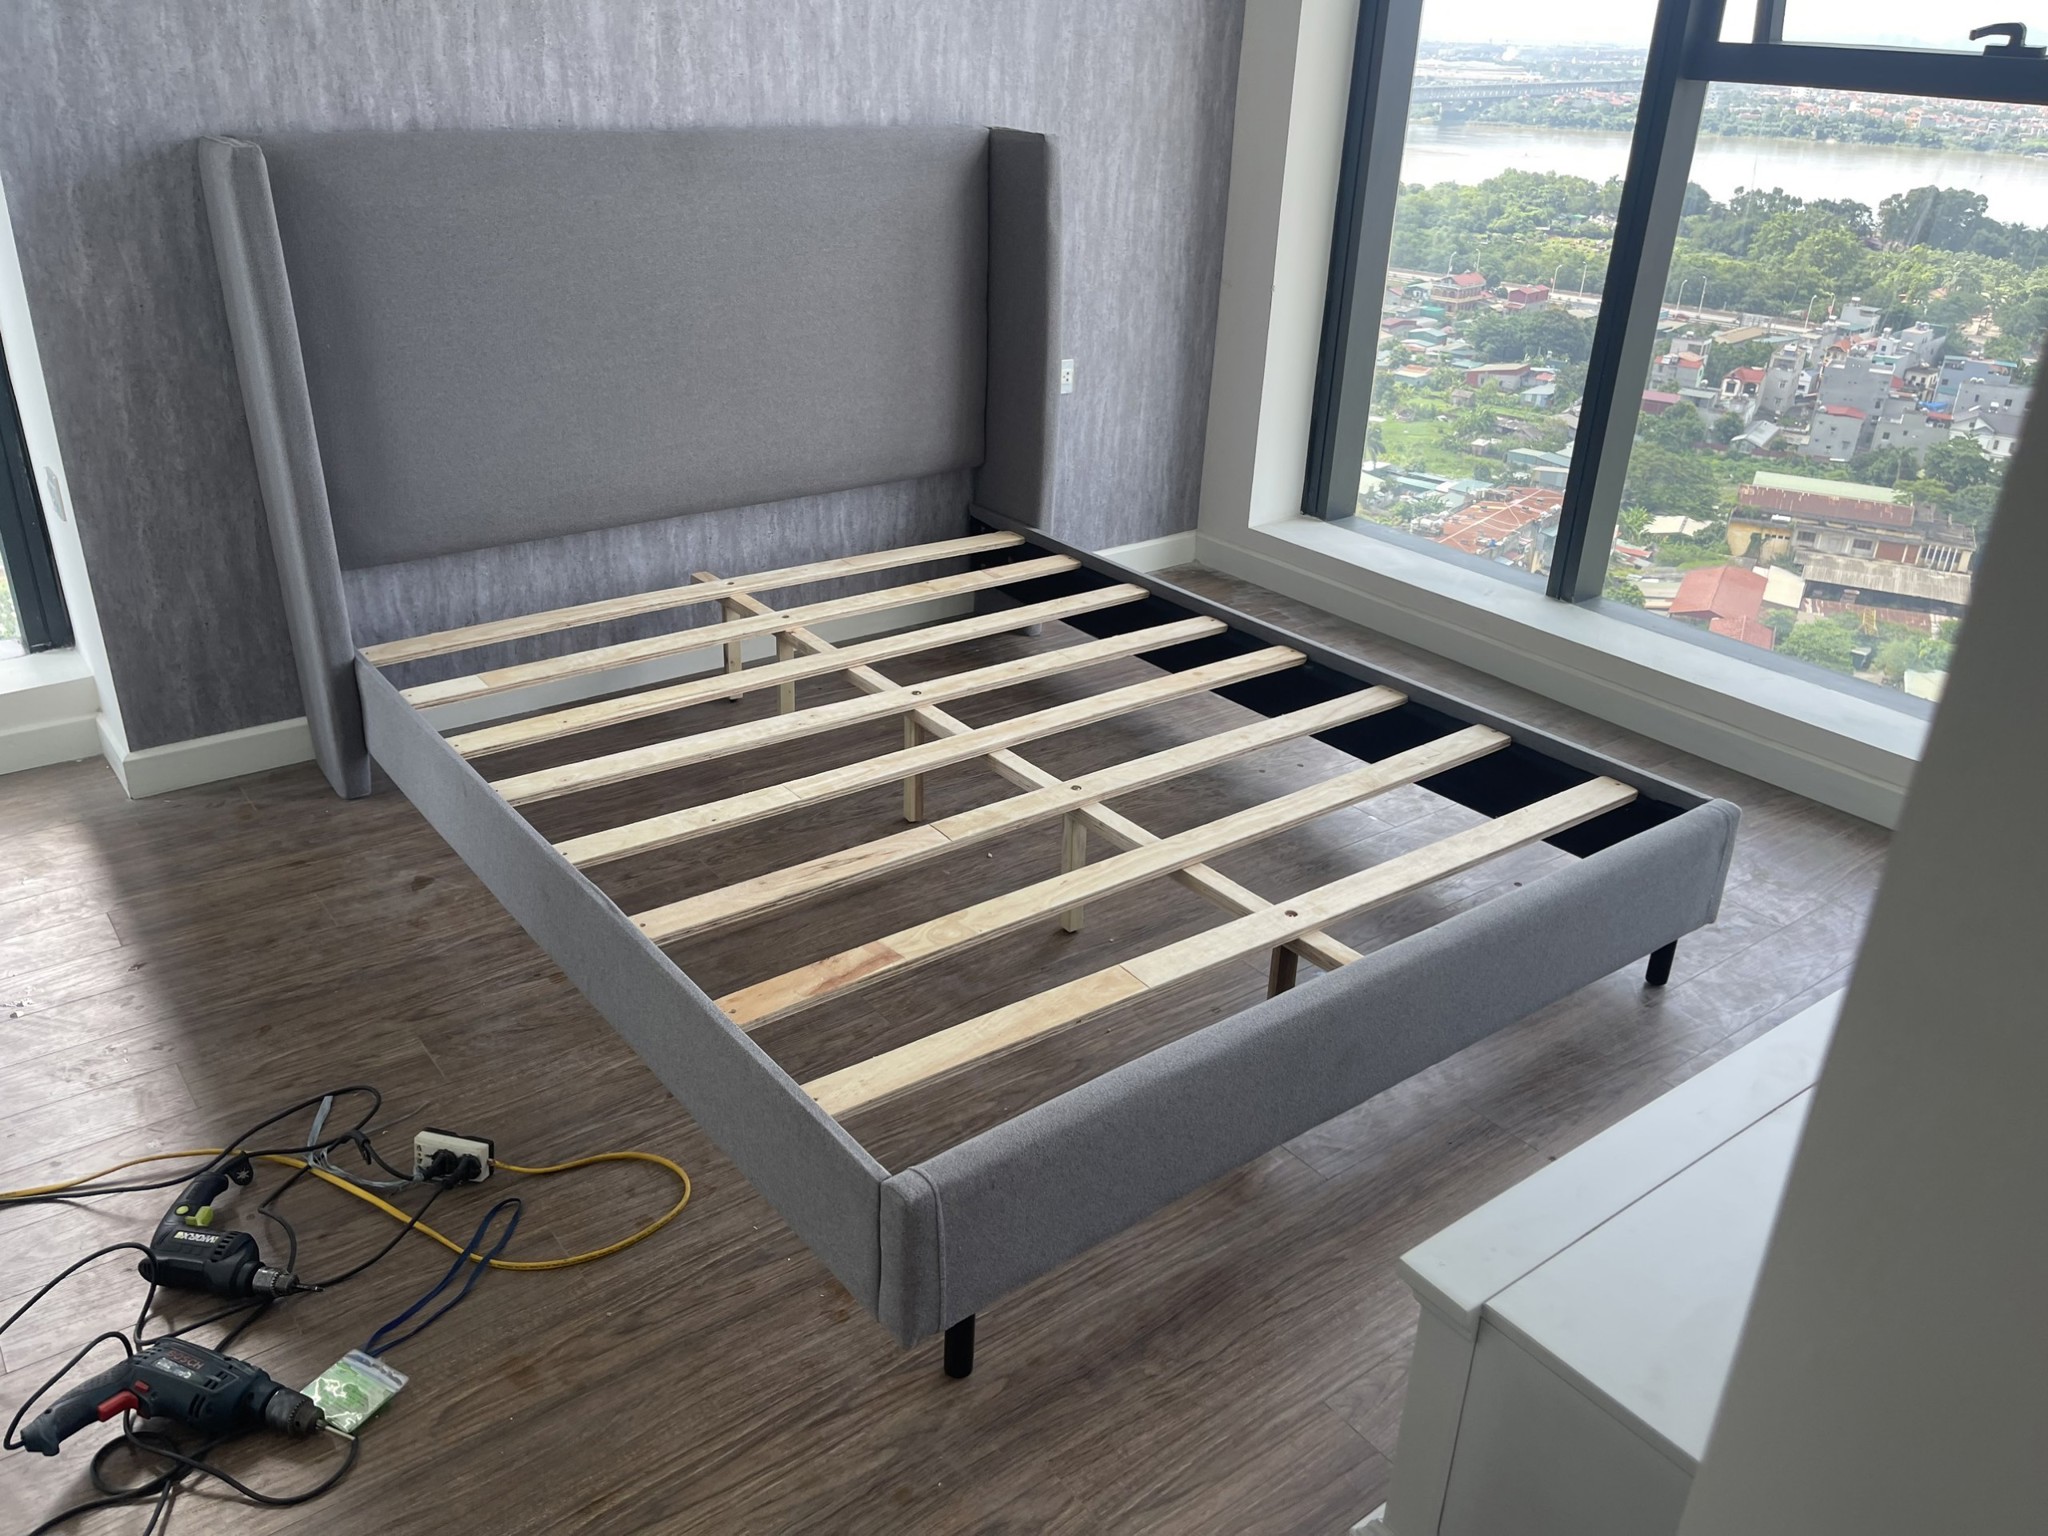 giường-ngủ-xdaily-bed-g2 (4)